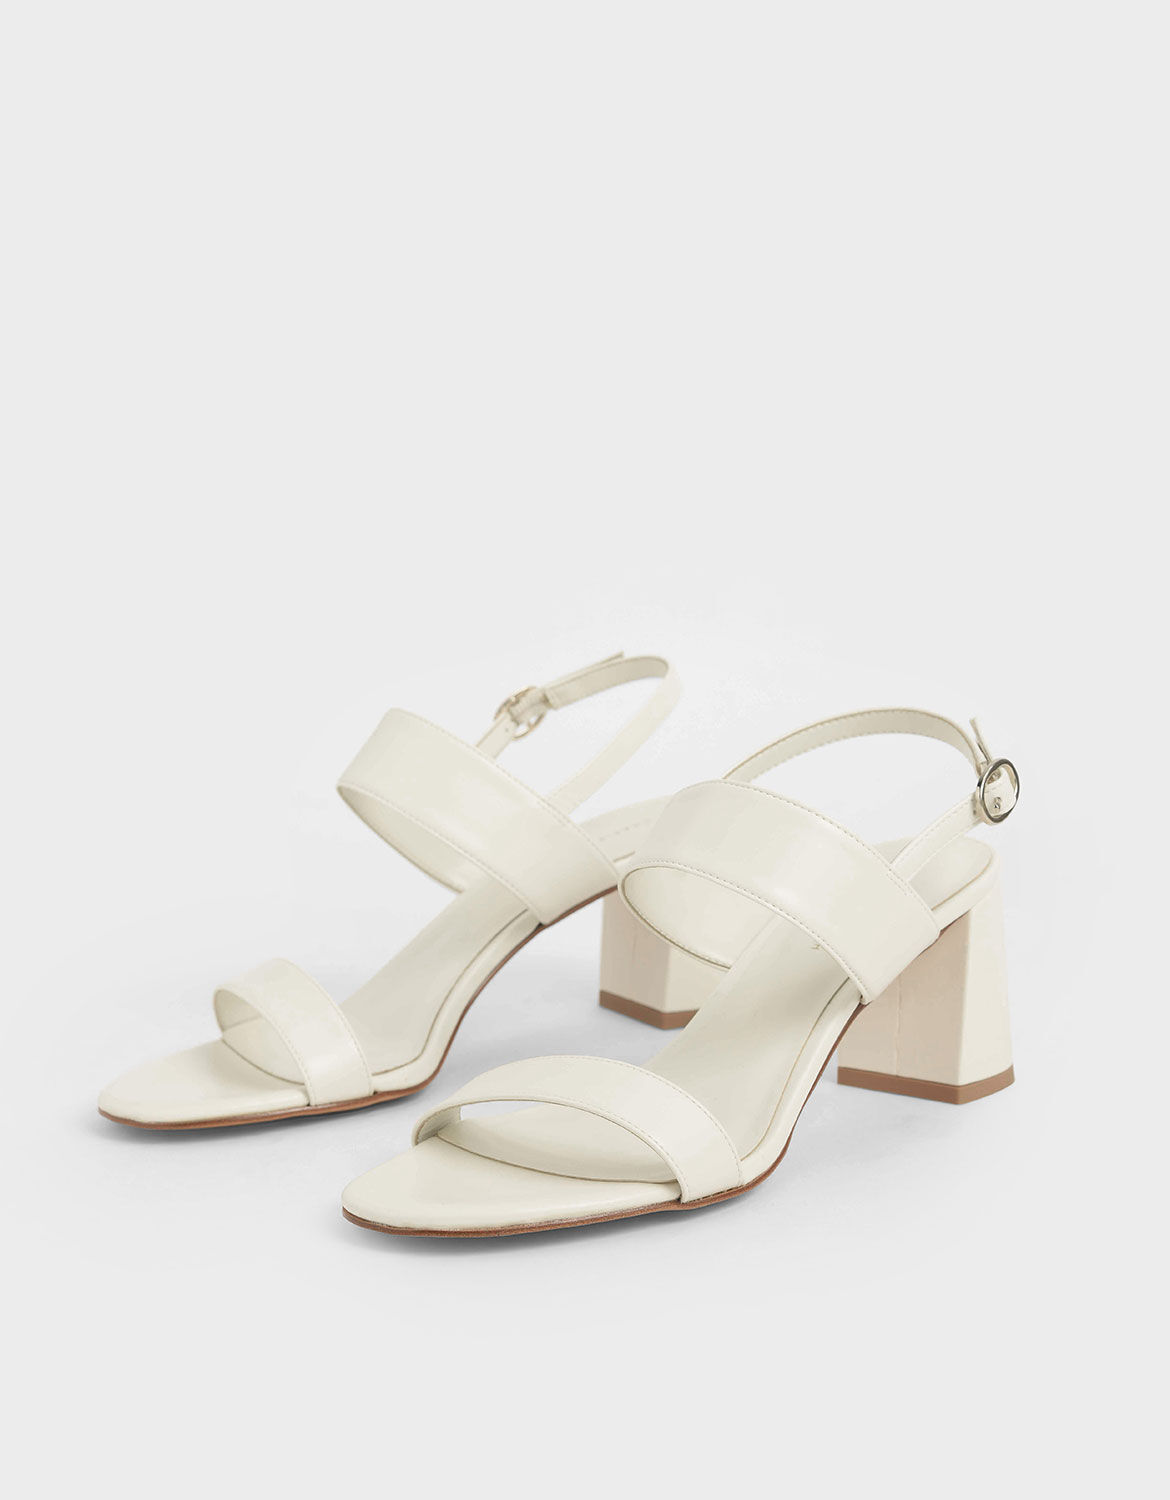 Wedding Shoes For Brides, Bridesmaids, Guests - CHARLES & KEITH IE